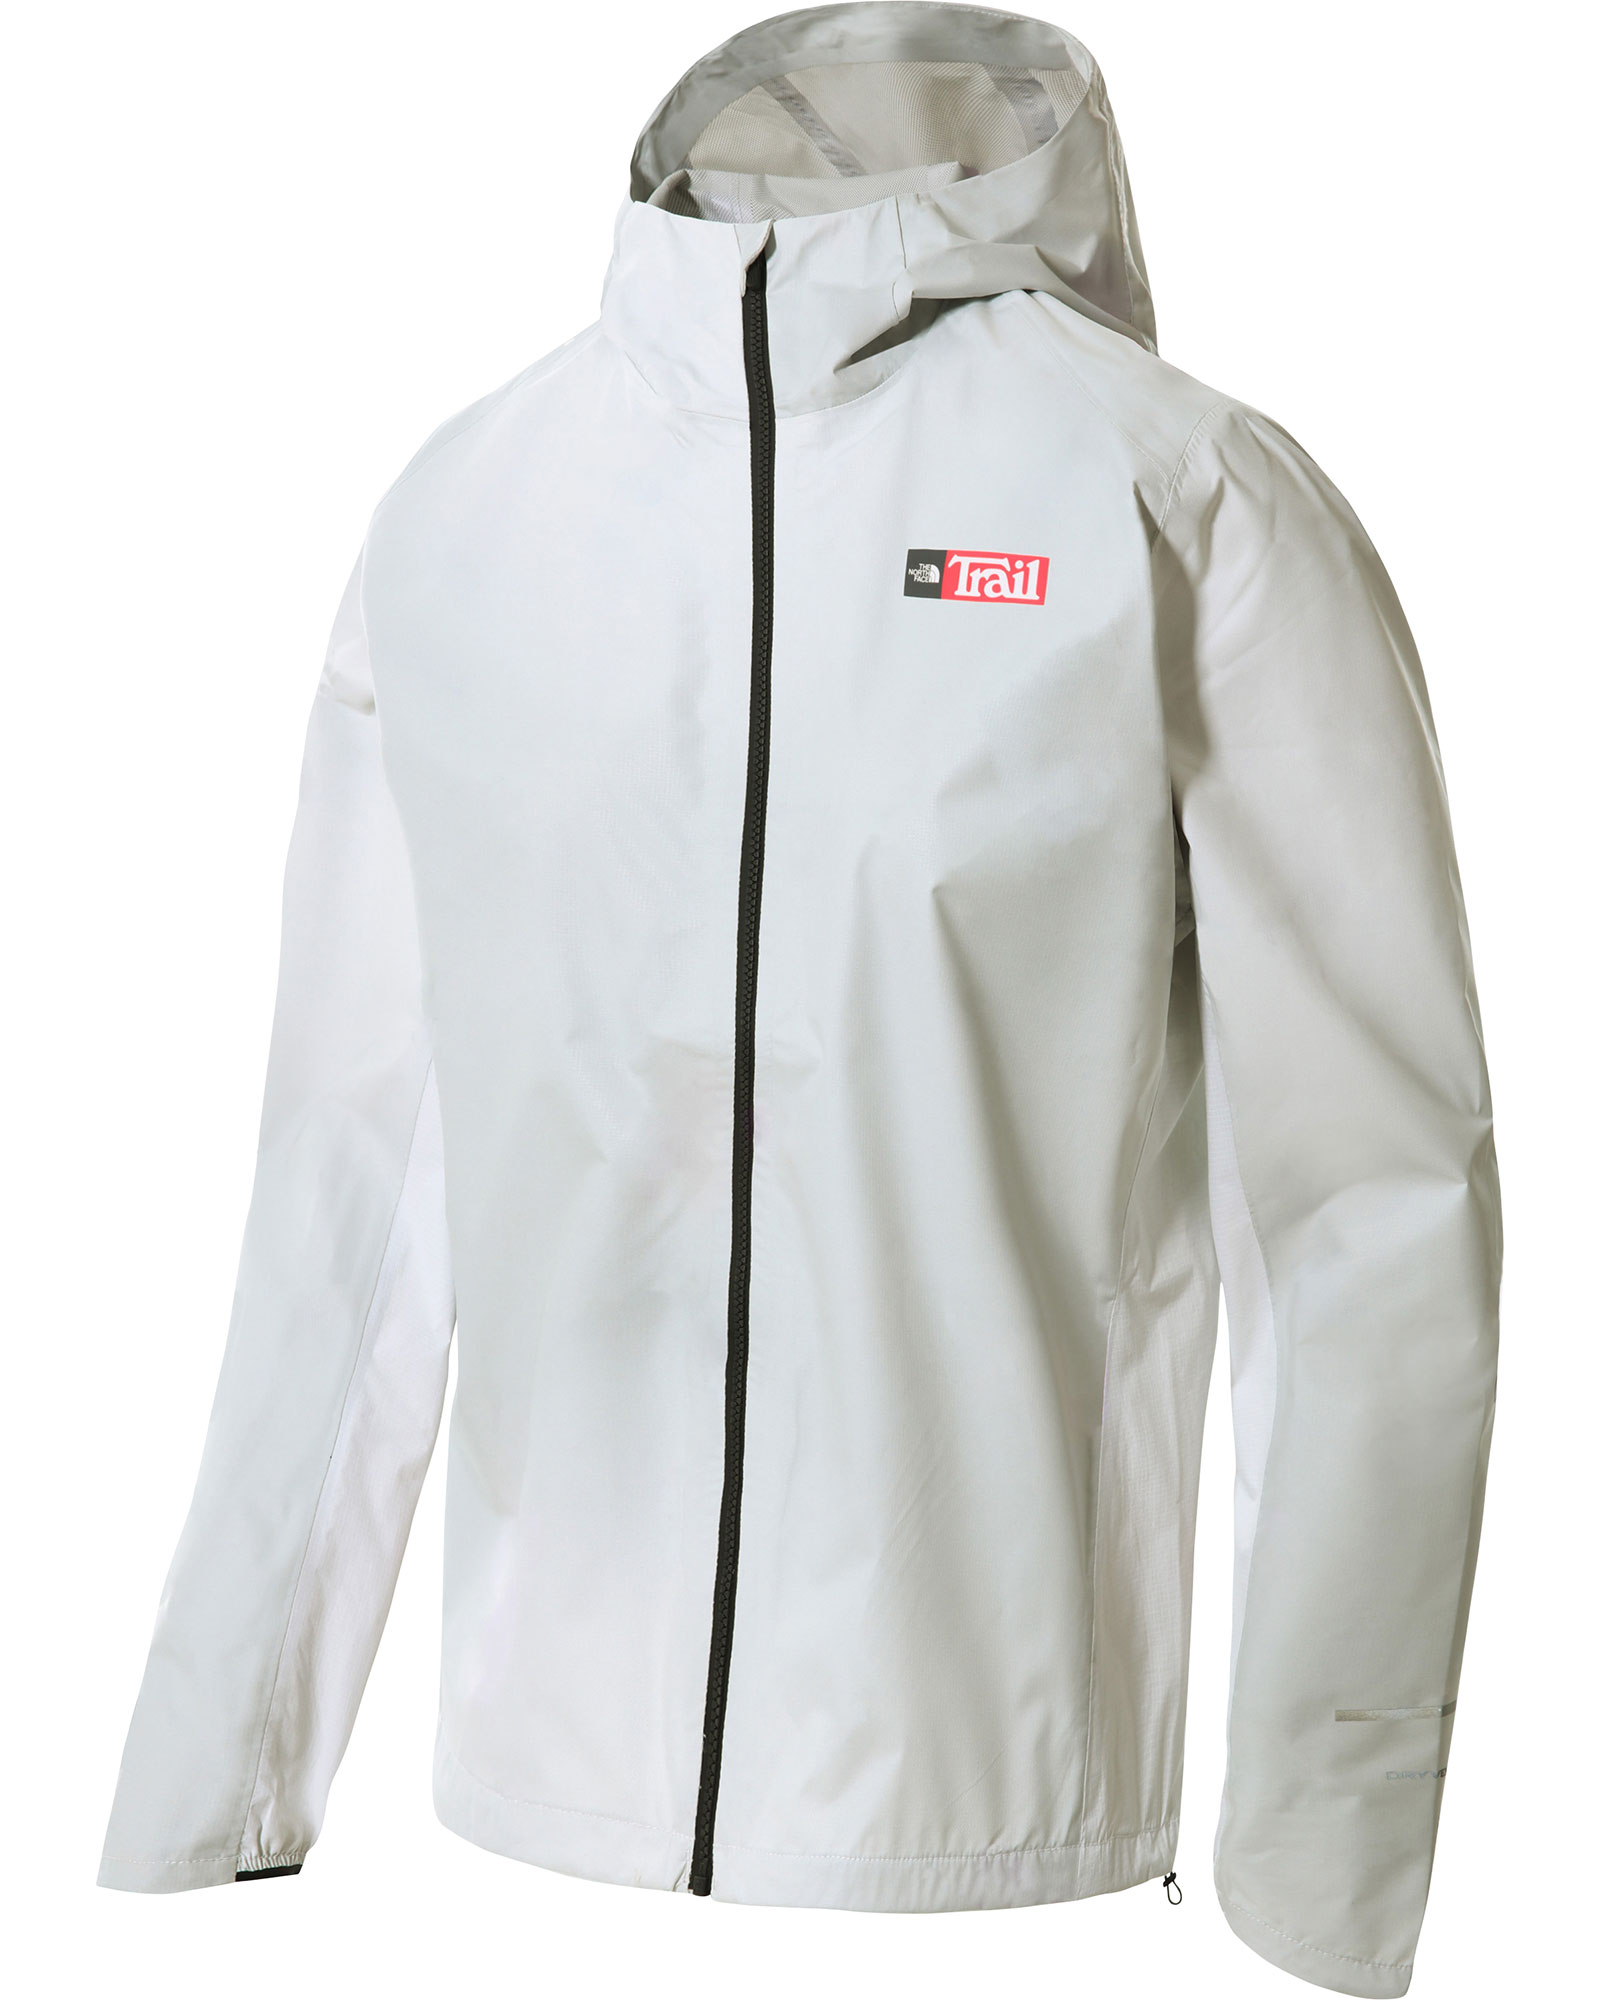 The North Face First Dawn Print Women’s Packable Jacket - TNF White Print L